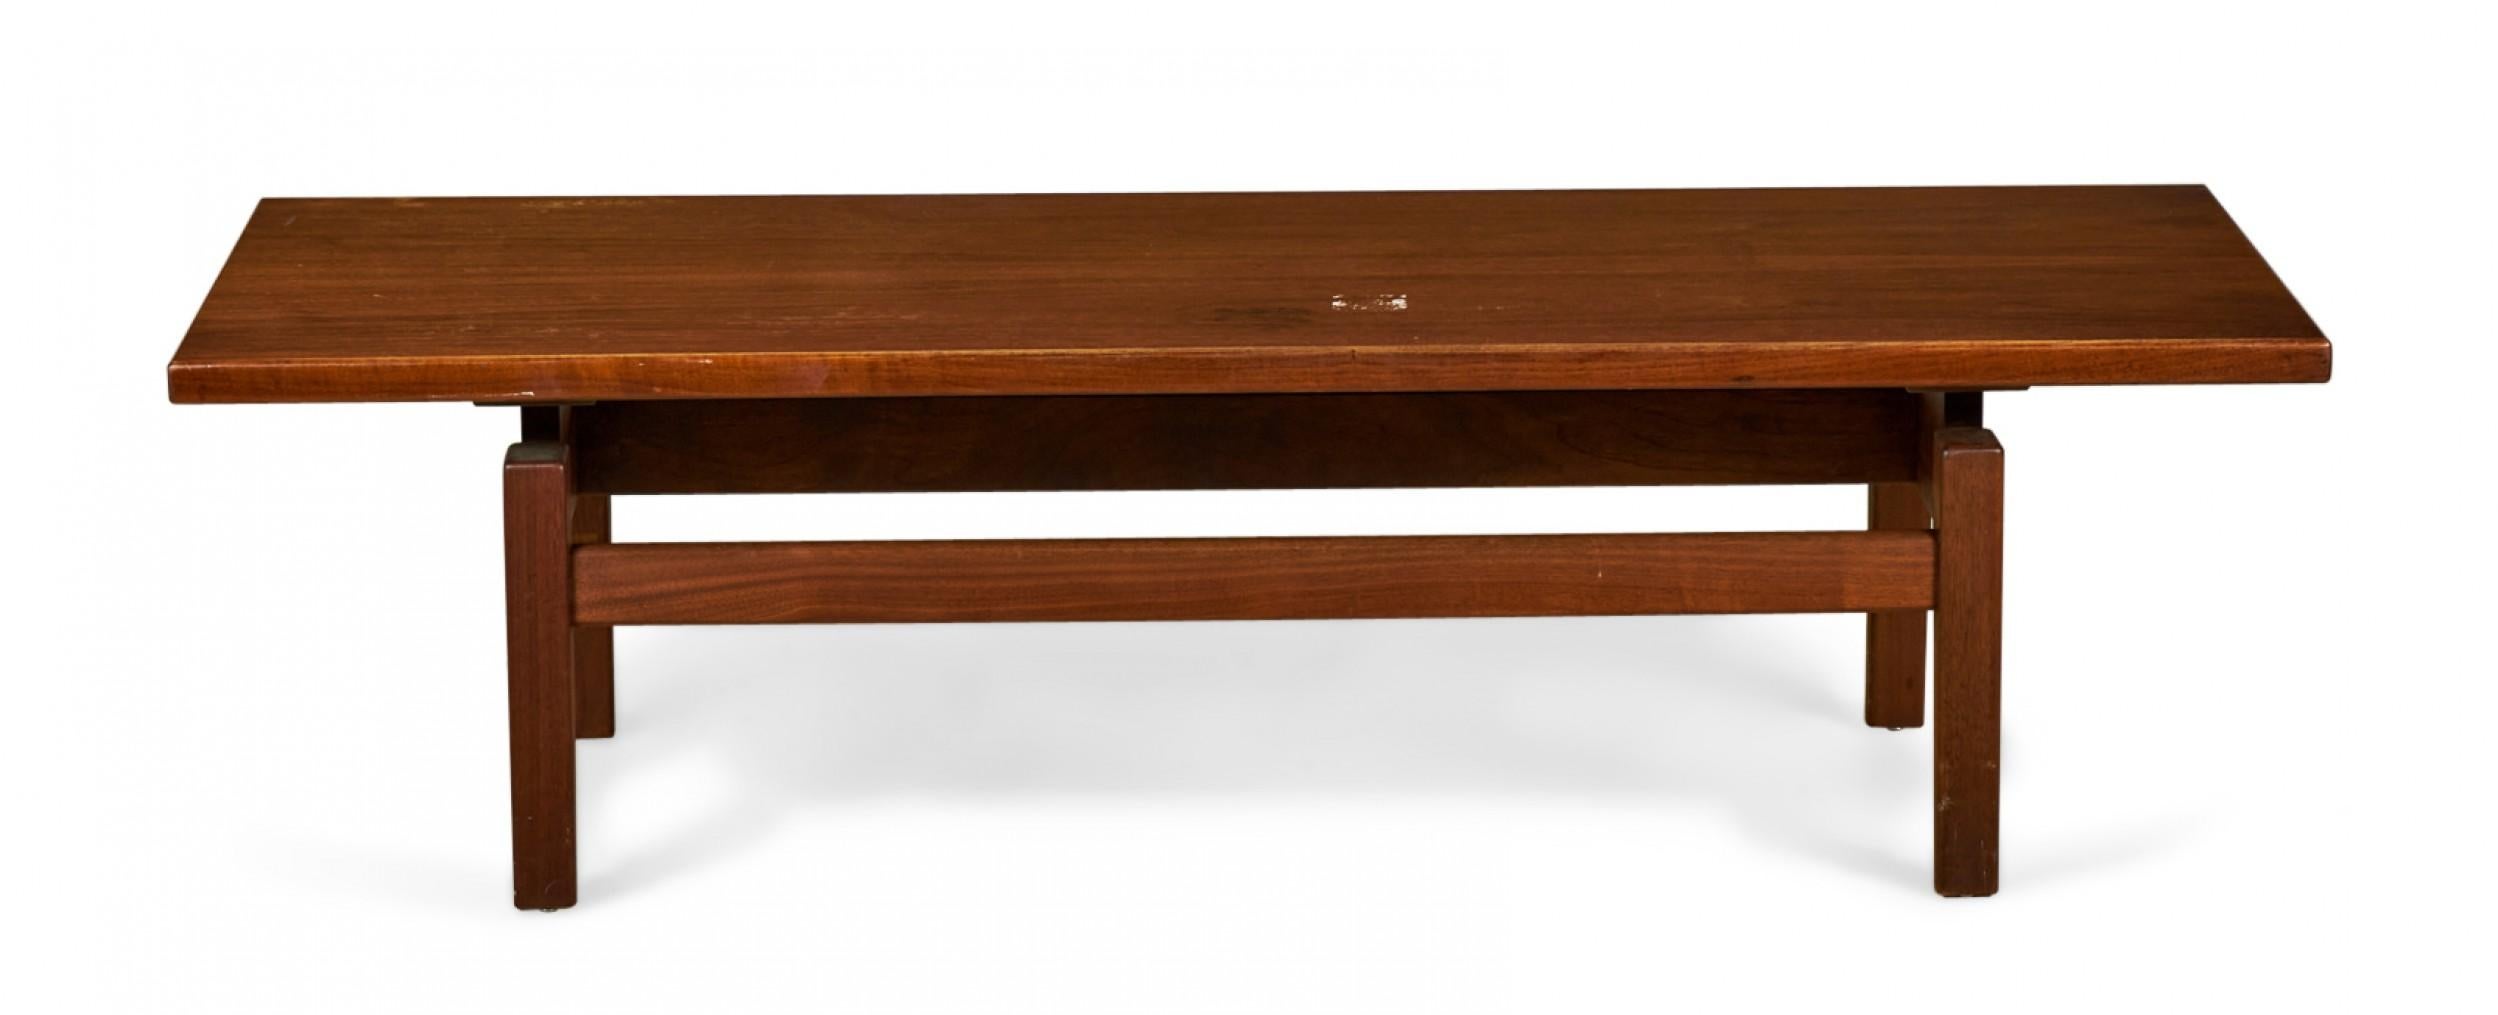 Pair of Jens Risom Danish Mid-Century Floating Top Walnut Coffee Table / Benches In Good Condition For Sale In New York, NY